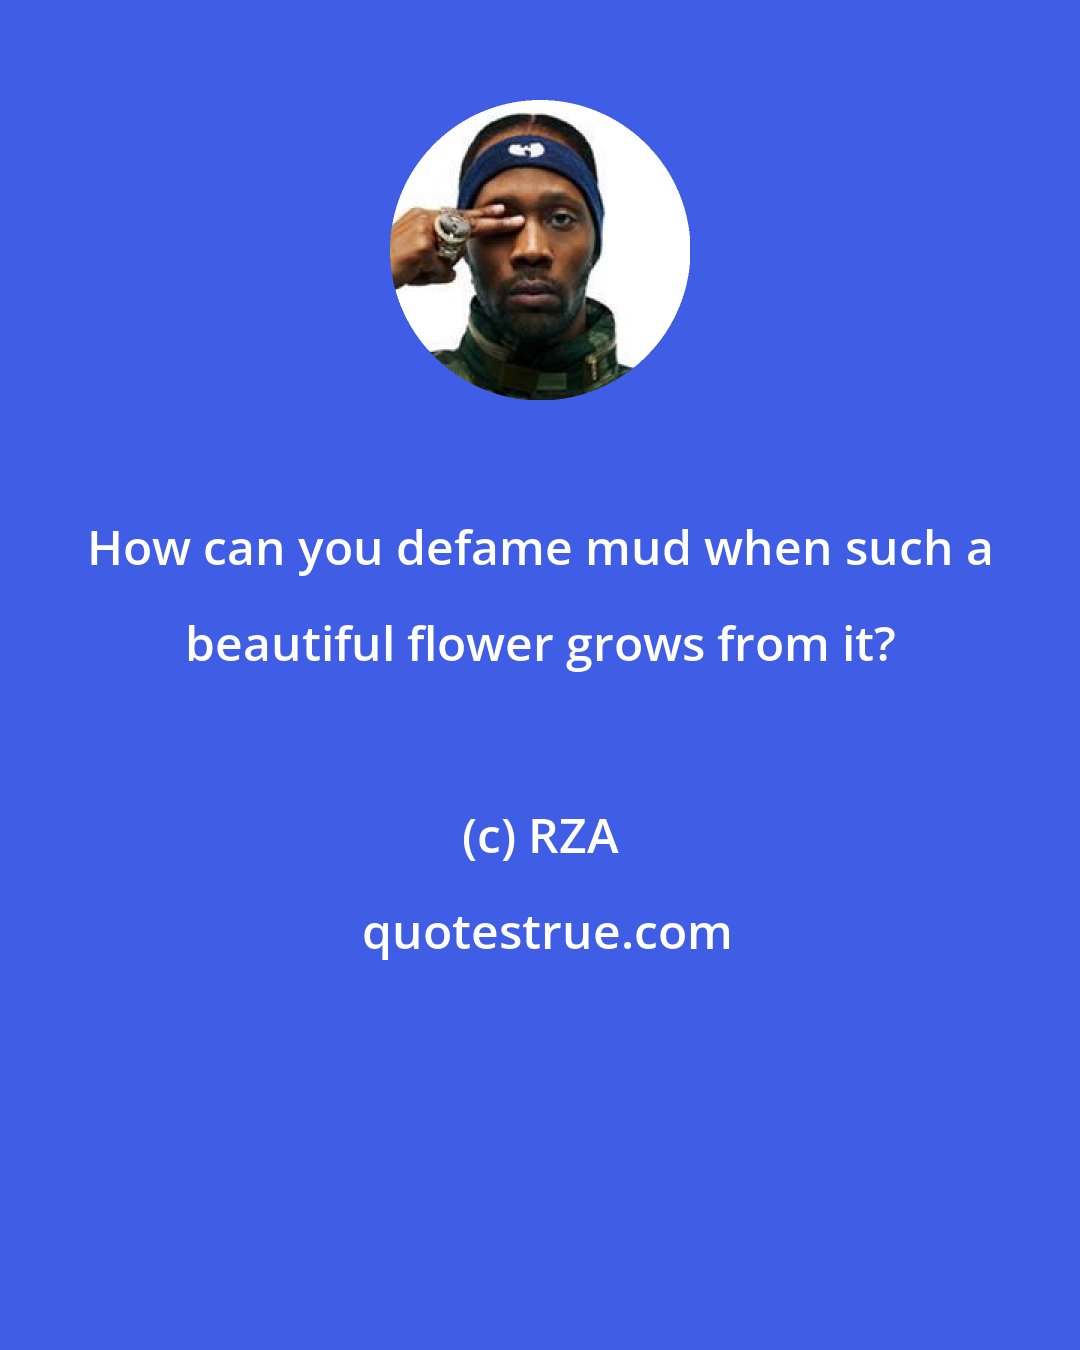 RZA: How can you defame mud when such a beautiful flower grows from it?